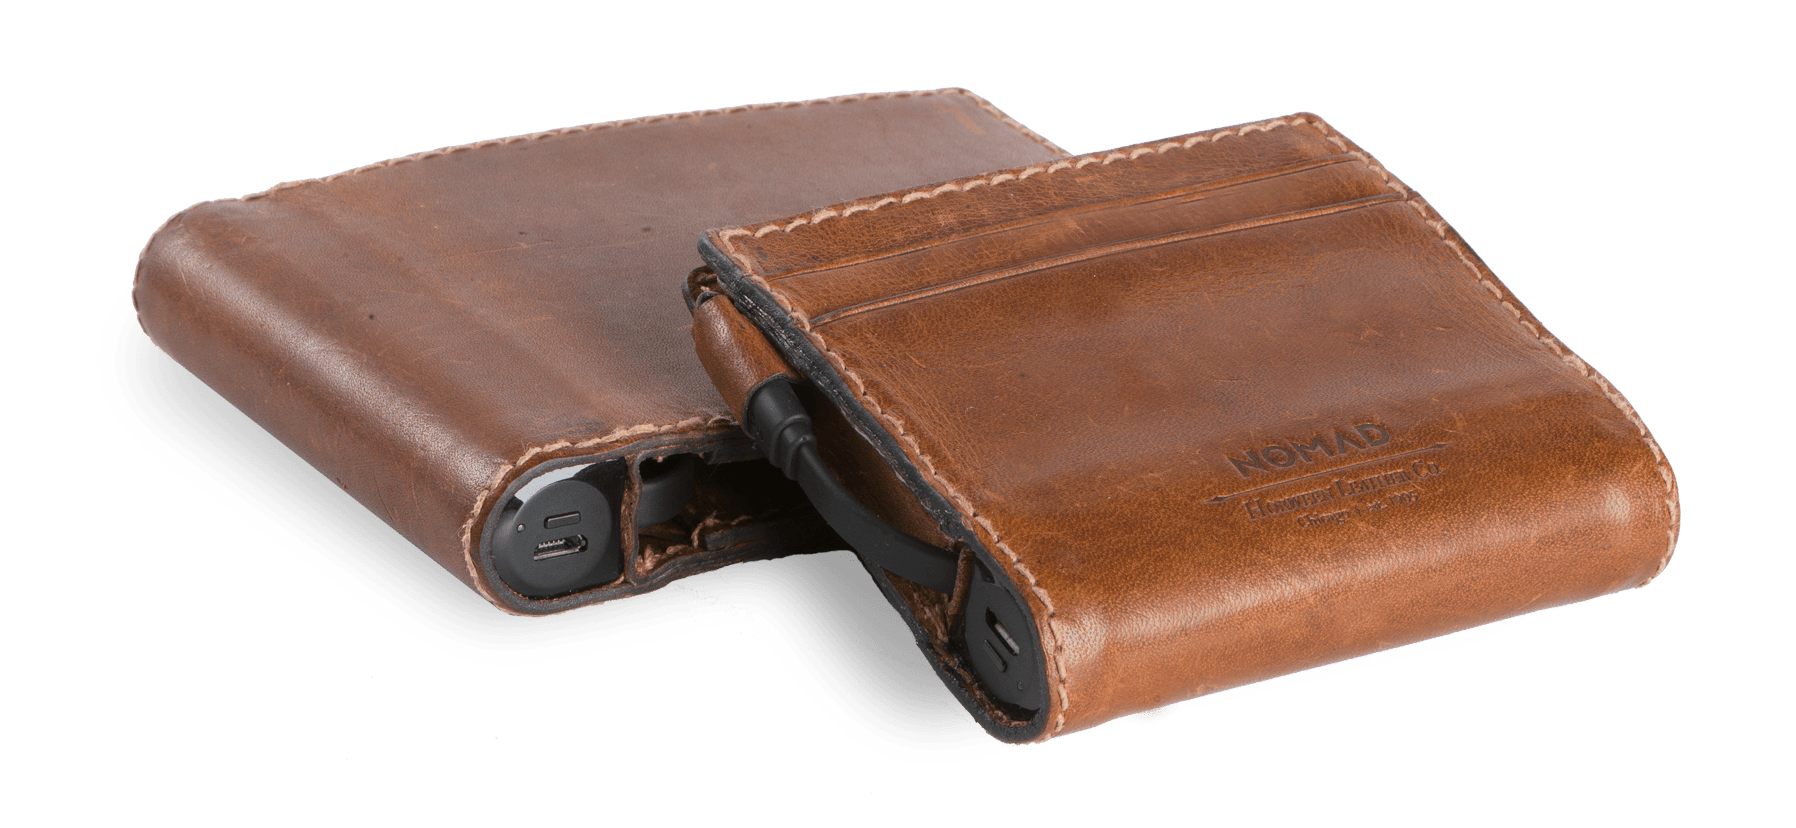 Nomad Slim Charging Wallet Features